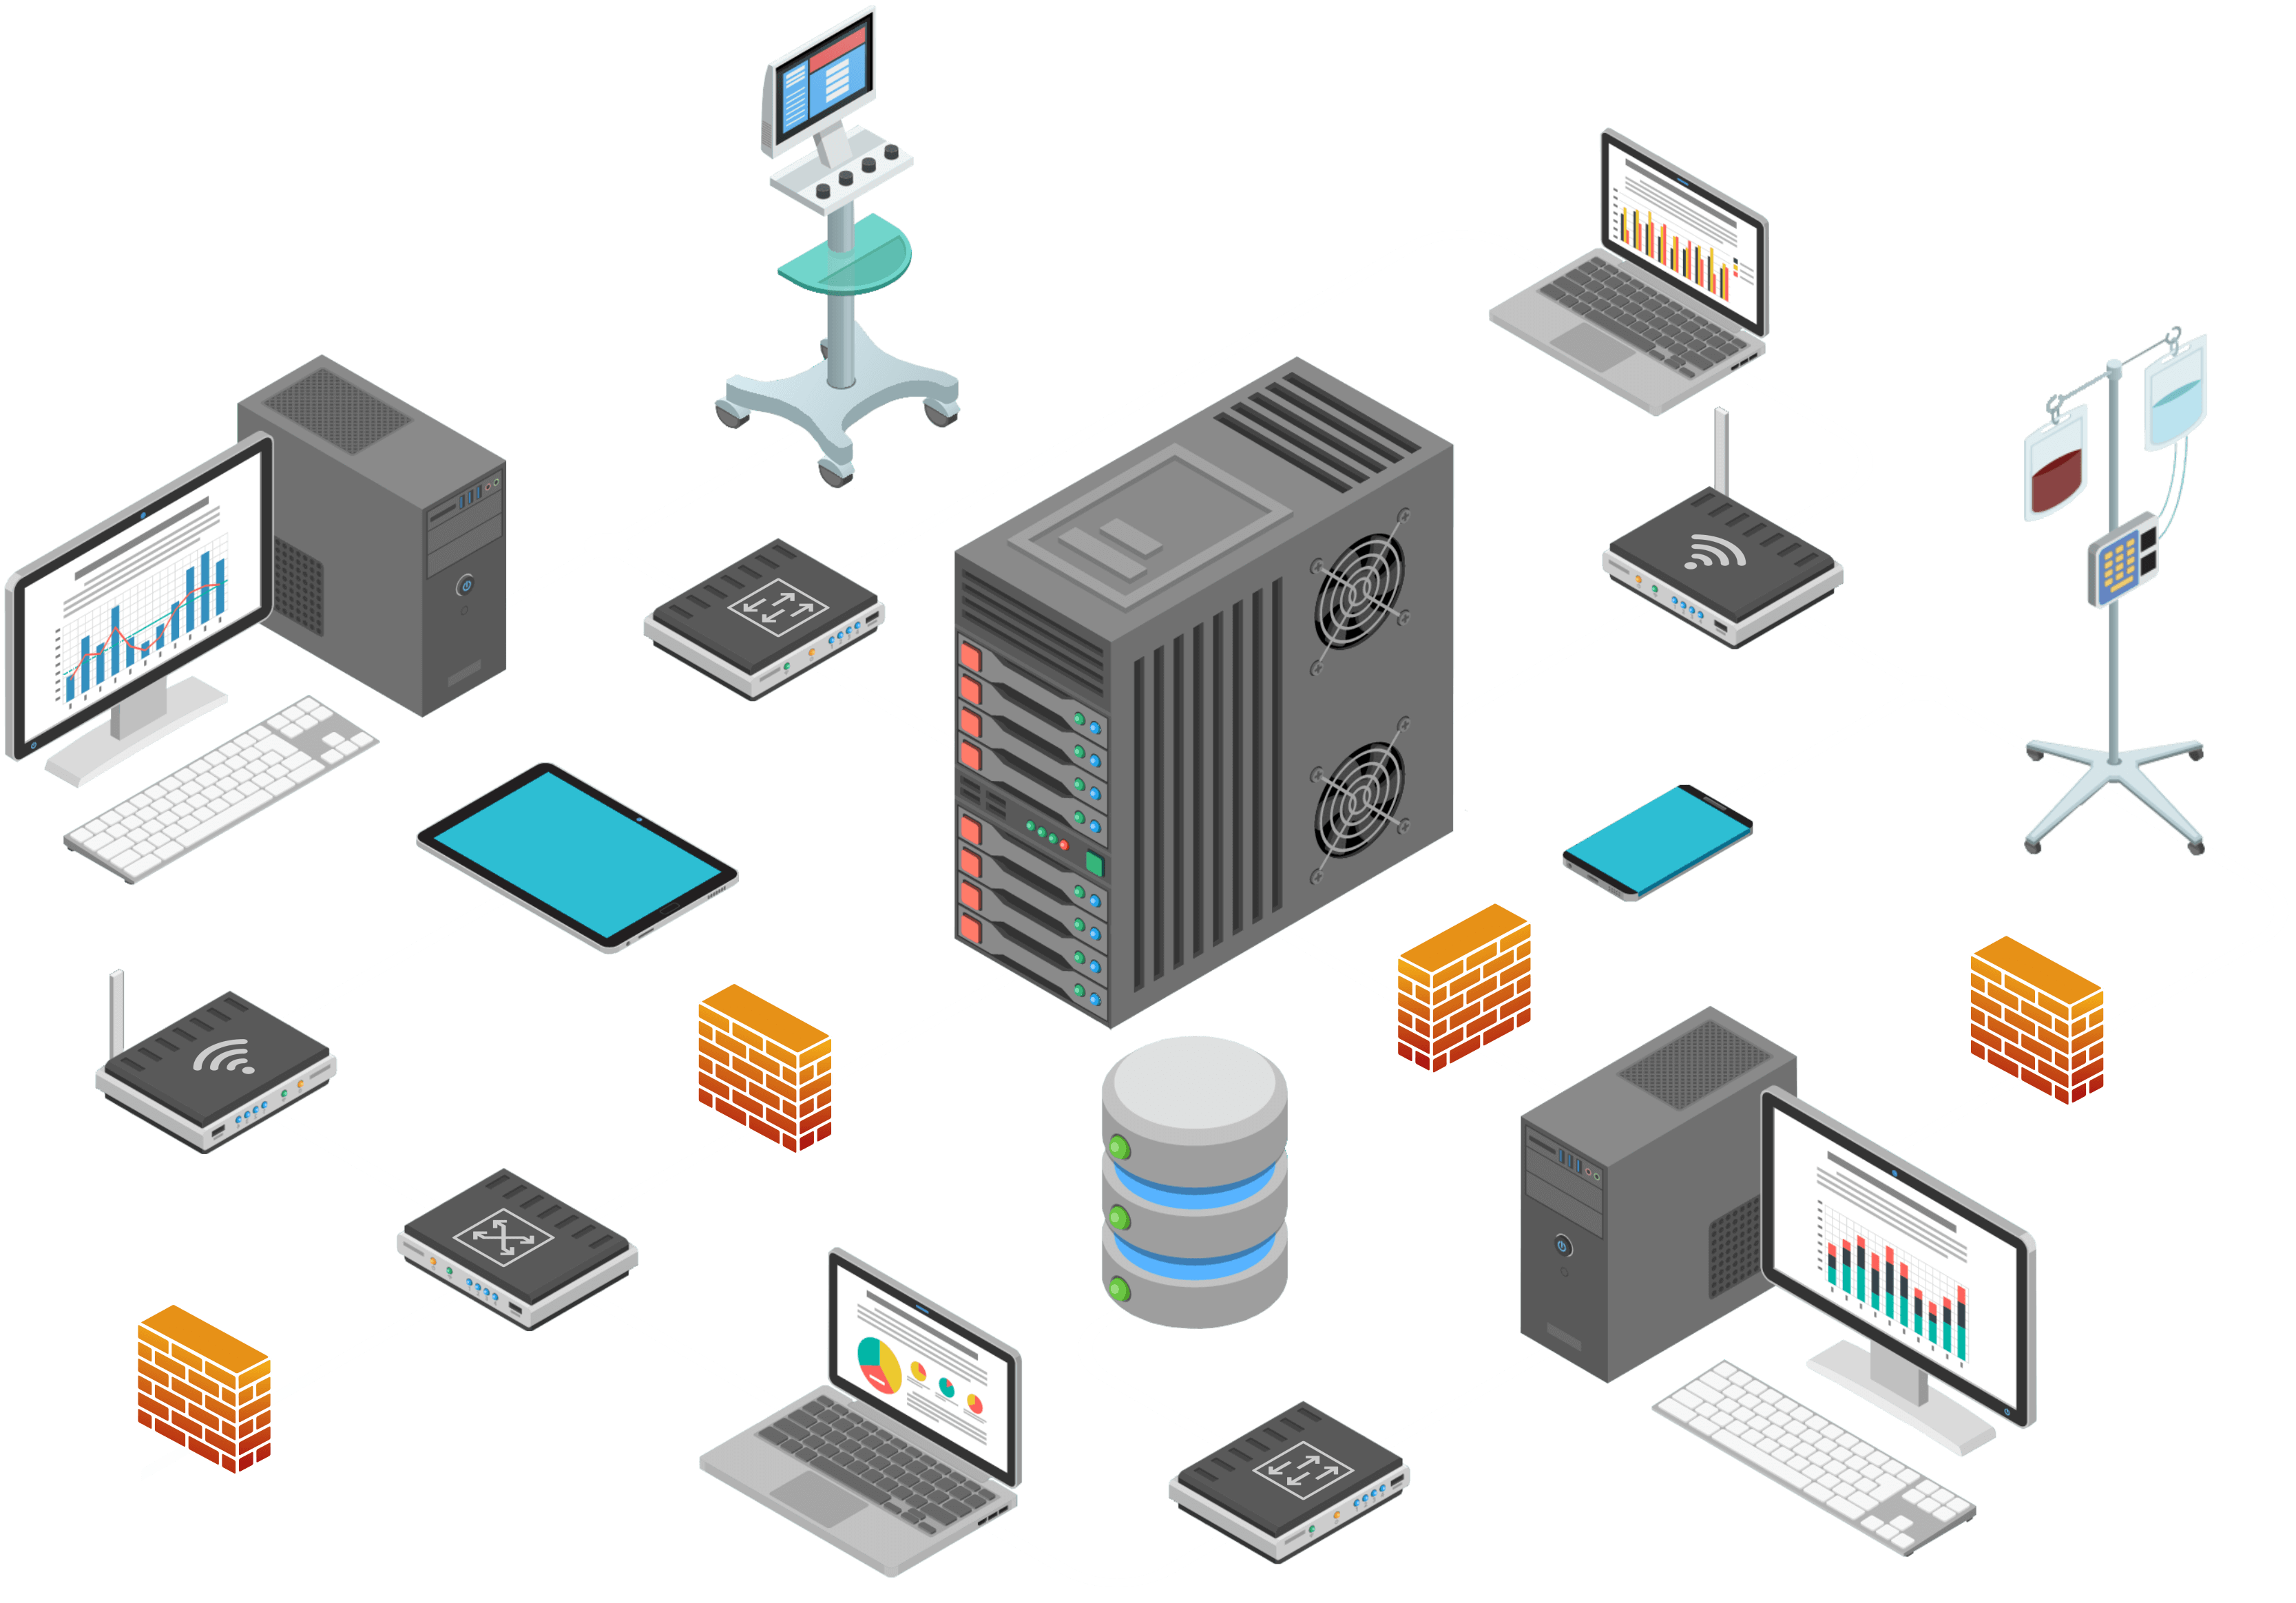 The image illustrates a representative healthcare network architecture with various components spread out throughout the hospital environment, utilizing various technologies to support healthcare functions and cybersecurity solutions.